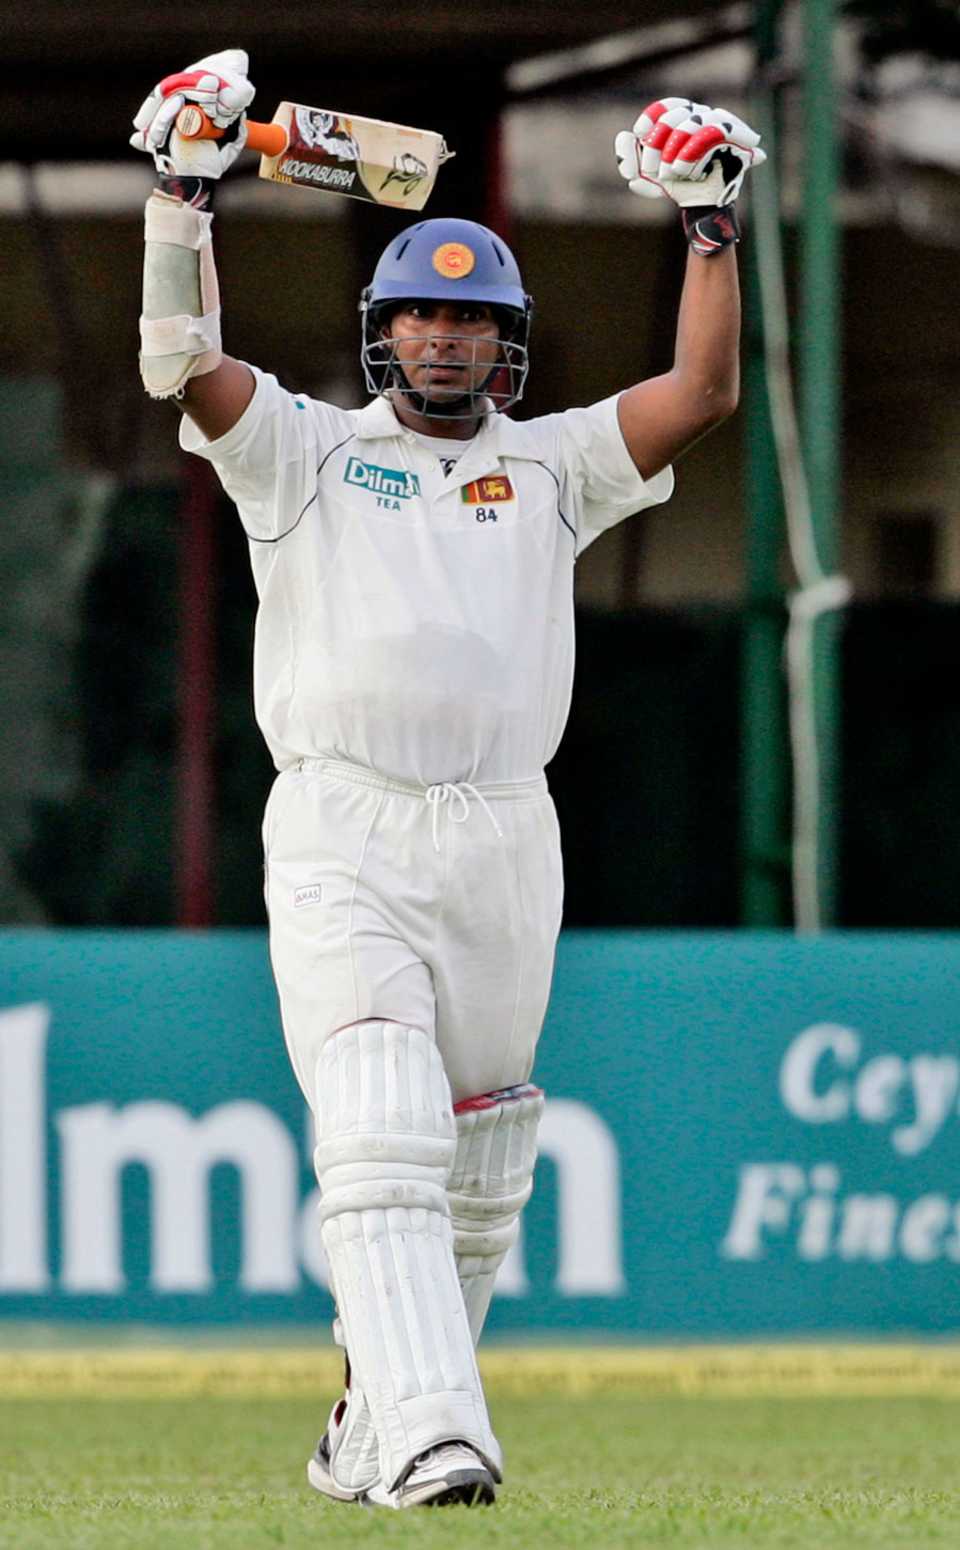 Kumar Sangakkara raises his arms in celebration after getting to a hundred